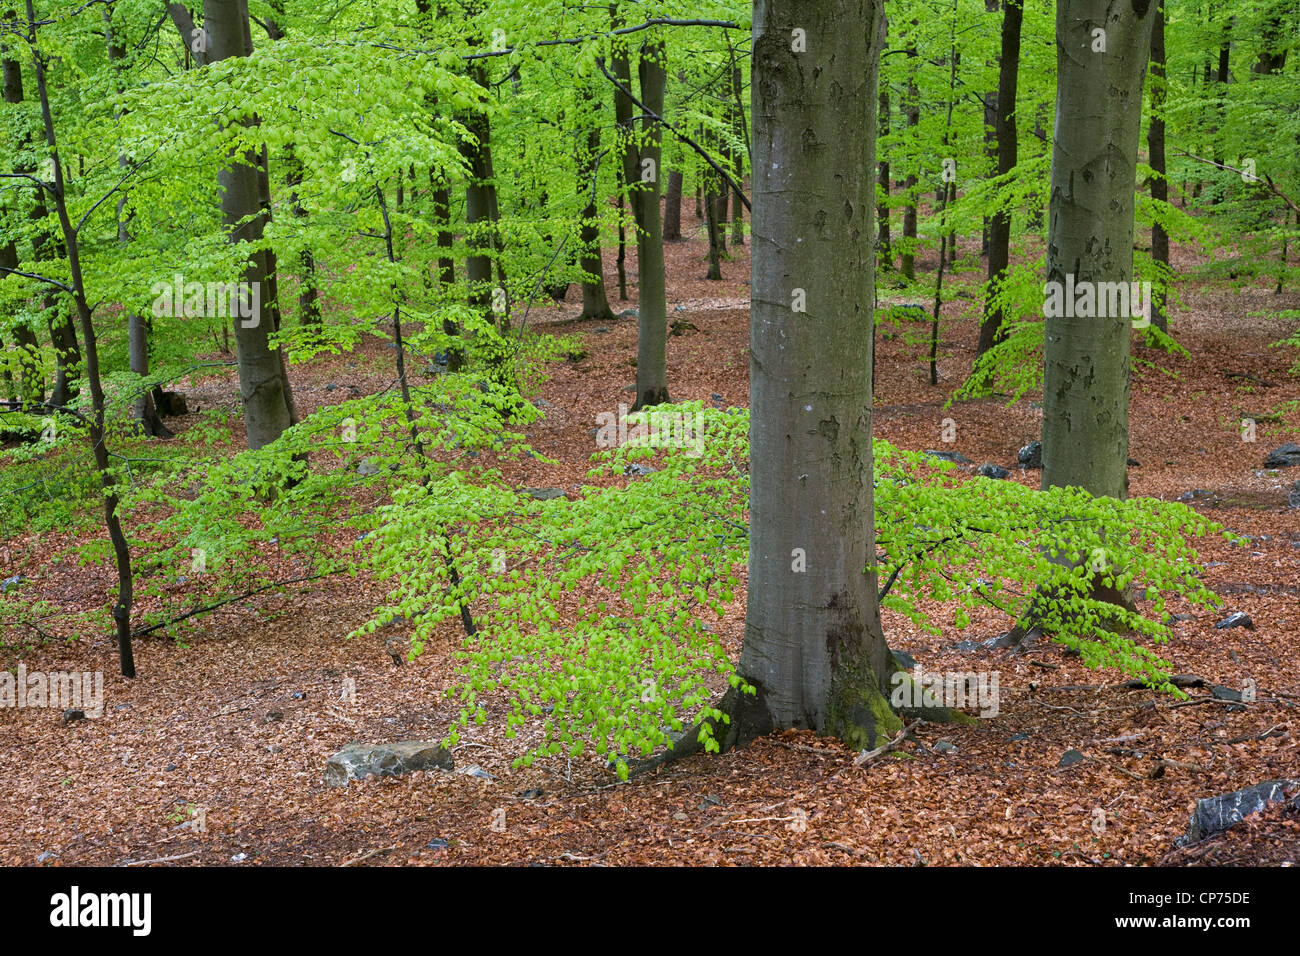 Beech trees (Fagus sylvatica) in broad-leaved forest in spring, Belgium Stock Photo